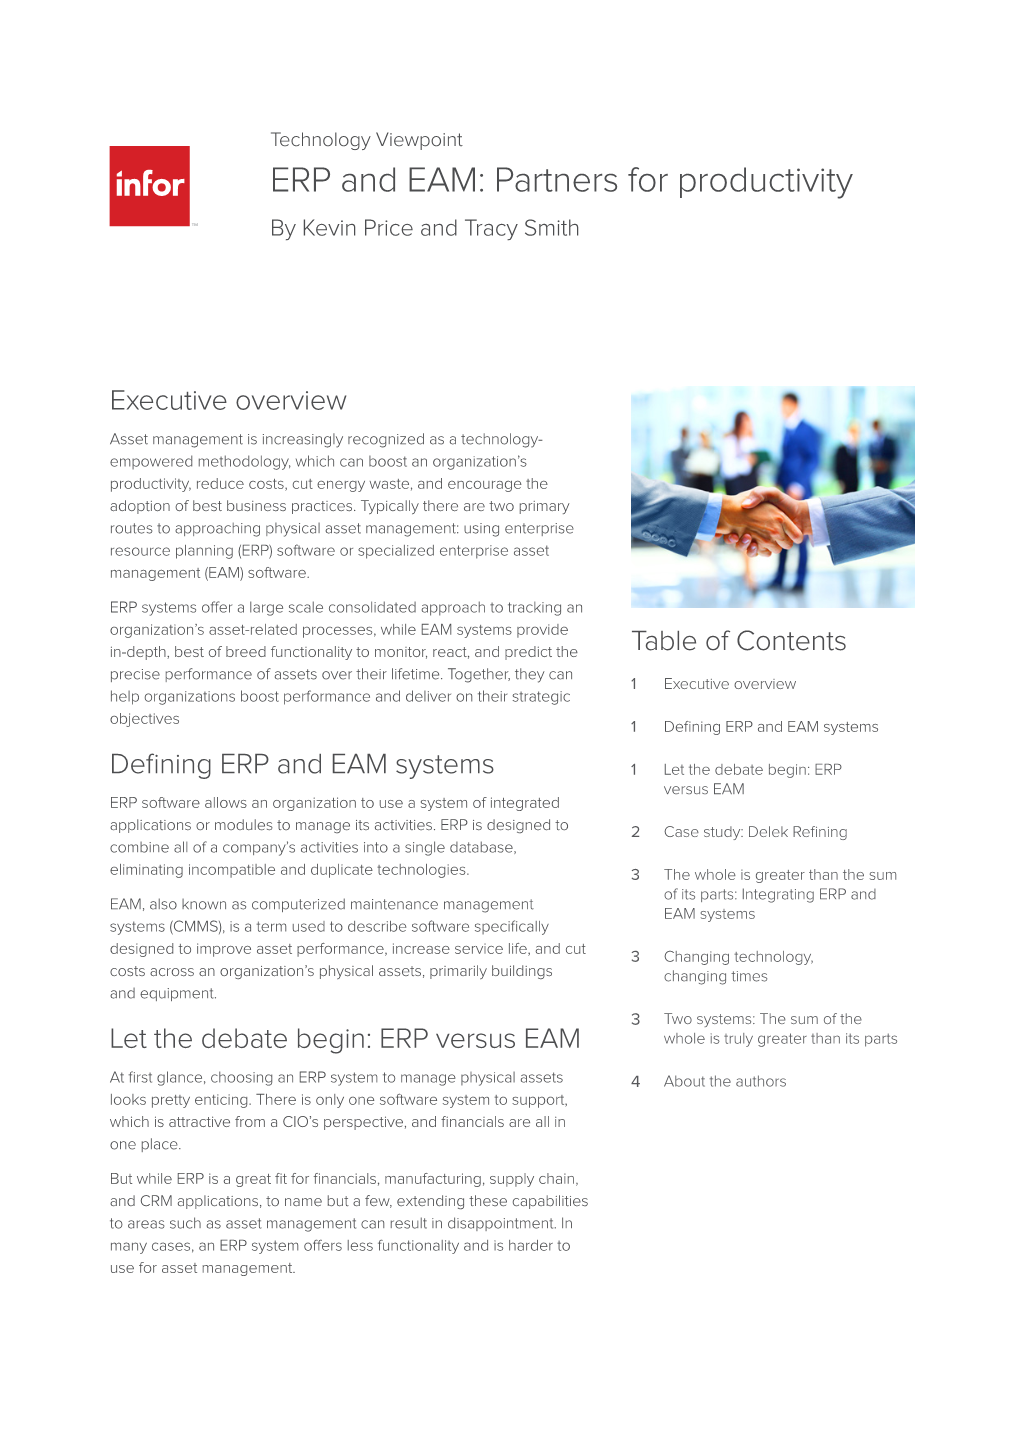 ERP and EAM: Partners for Productivity by Kevin Price and Tracy Smith